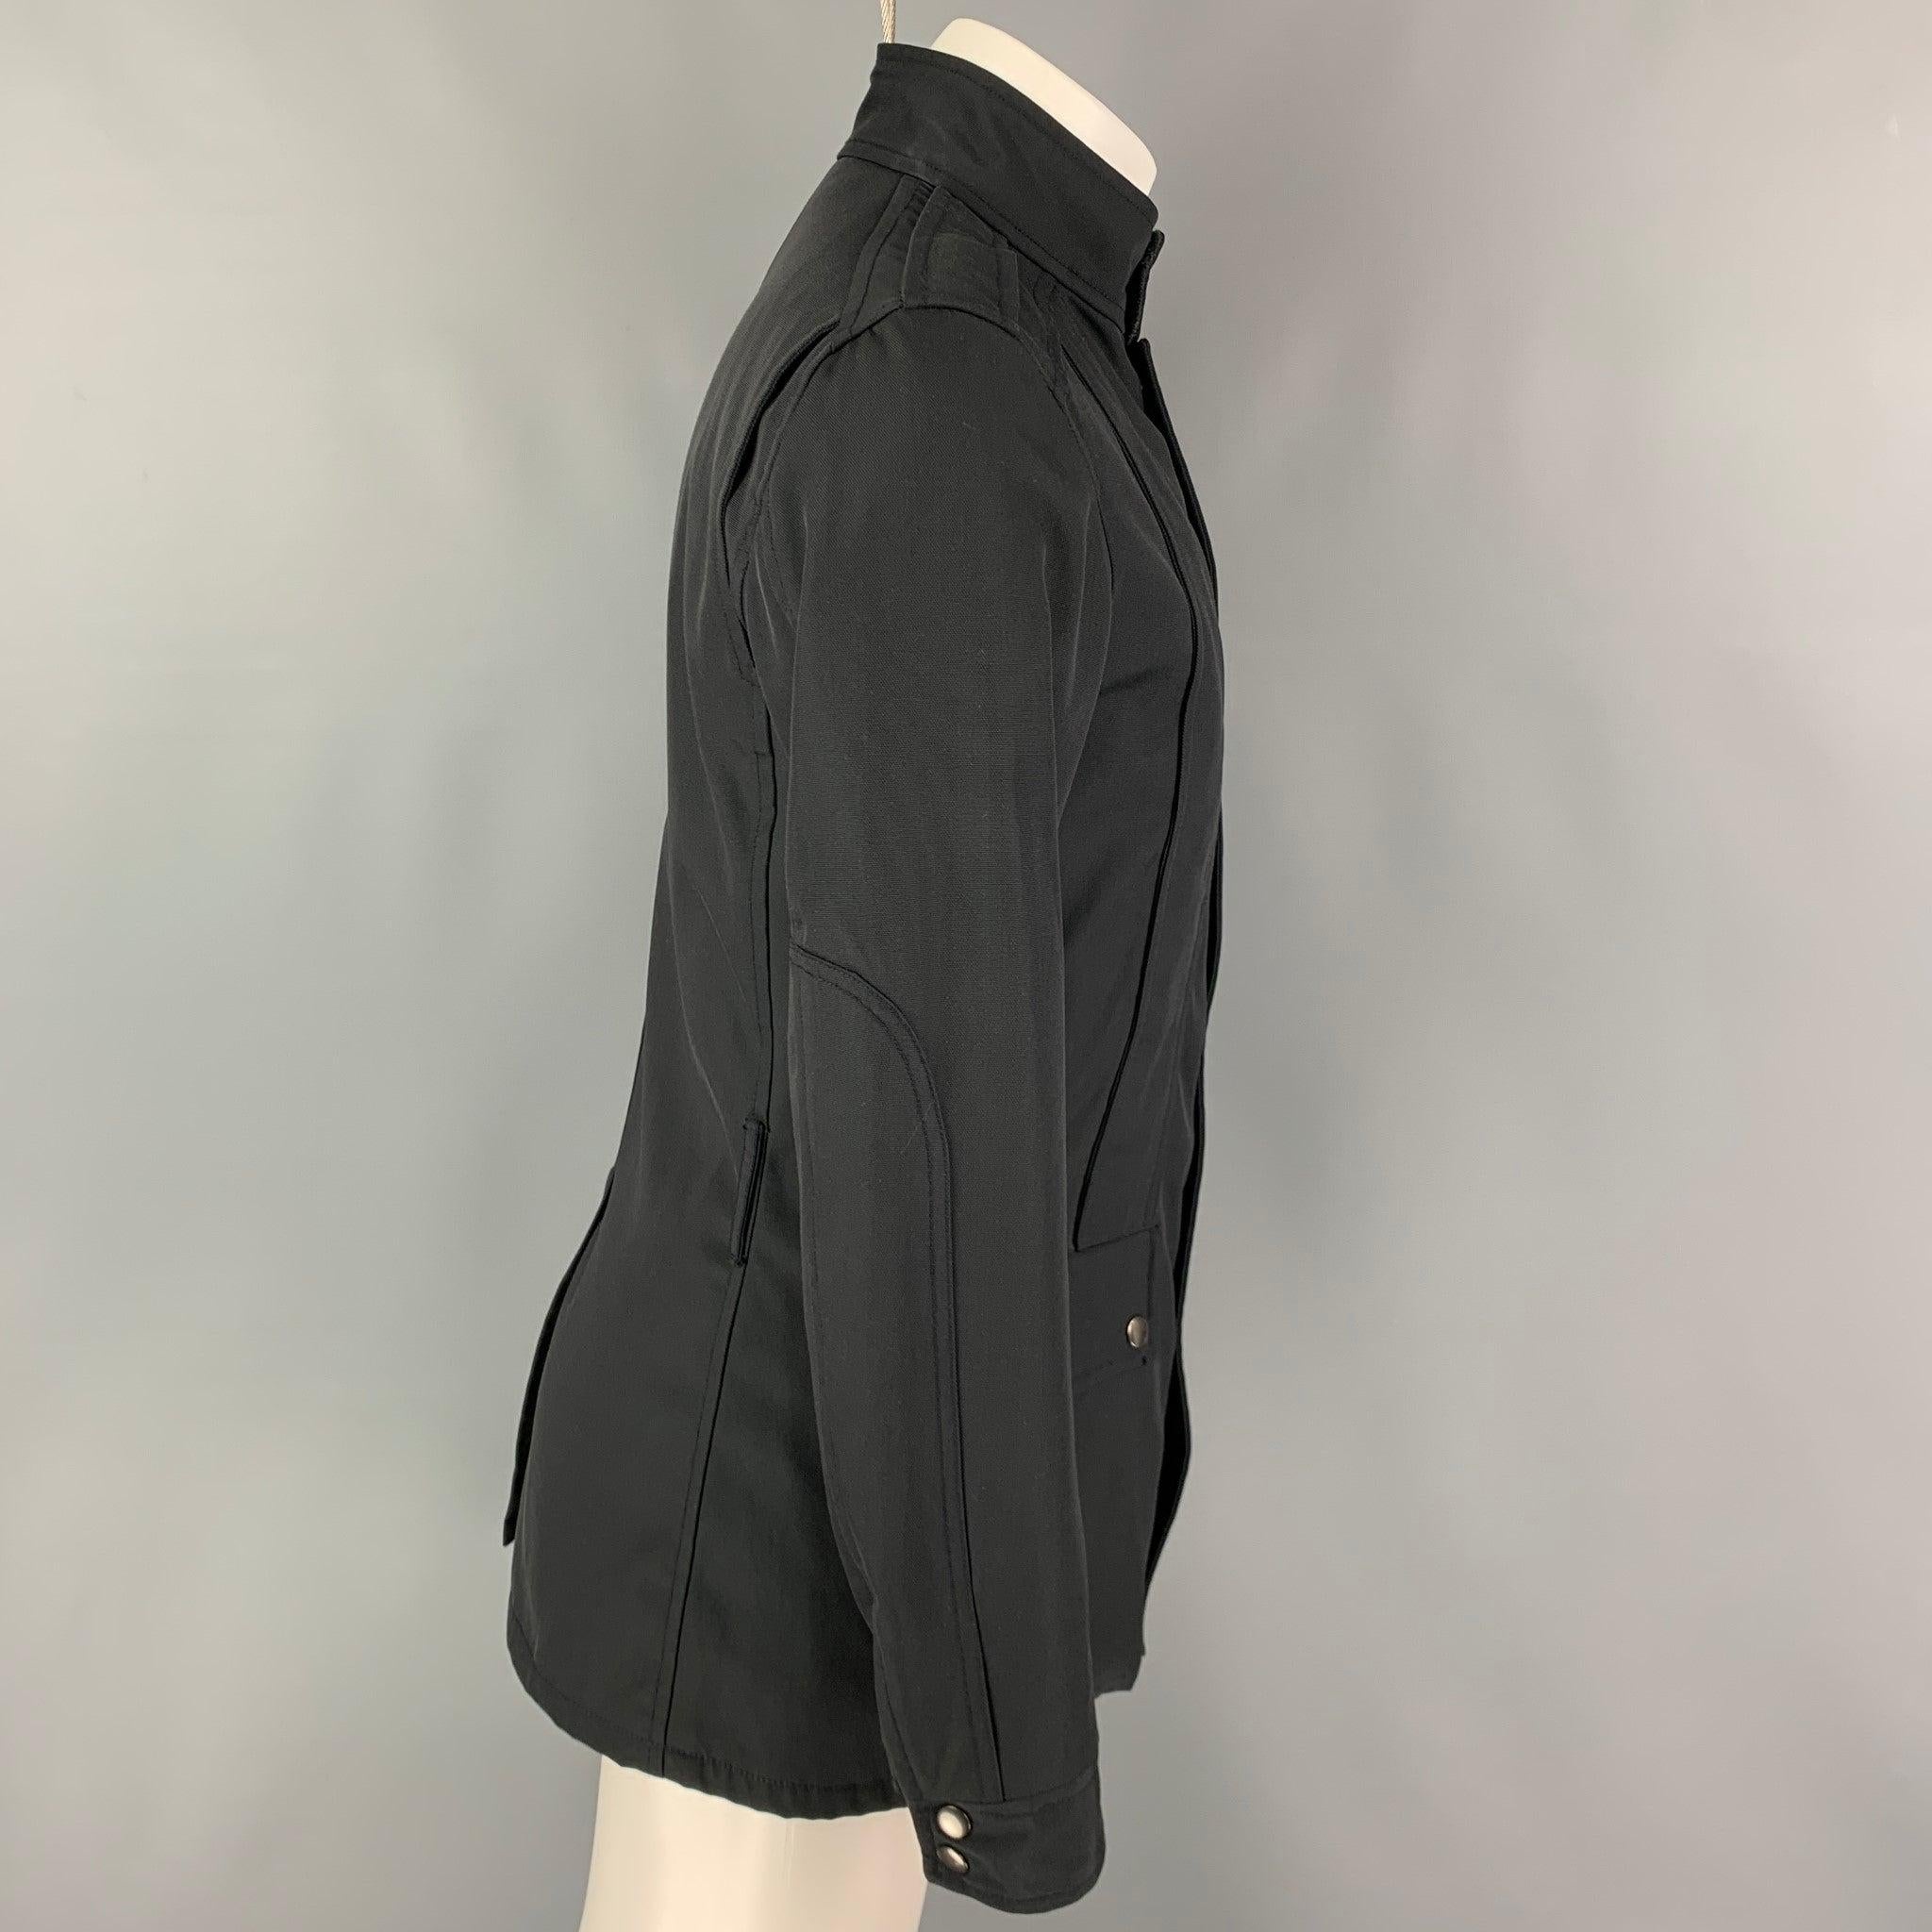 GUCCI by TOM FORD jacket comes in a black cotton / nylon featuring a parka style, front pockets, single back vent, and a snap button closure. Made in Italy.
Very Good
Pre-Owned Condition. 

Marked:  46 

Measurements: 
 
Shoulder: 17 inches Chest: